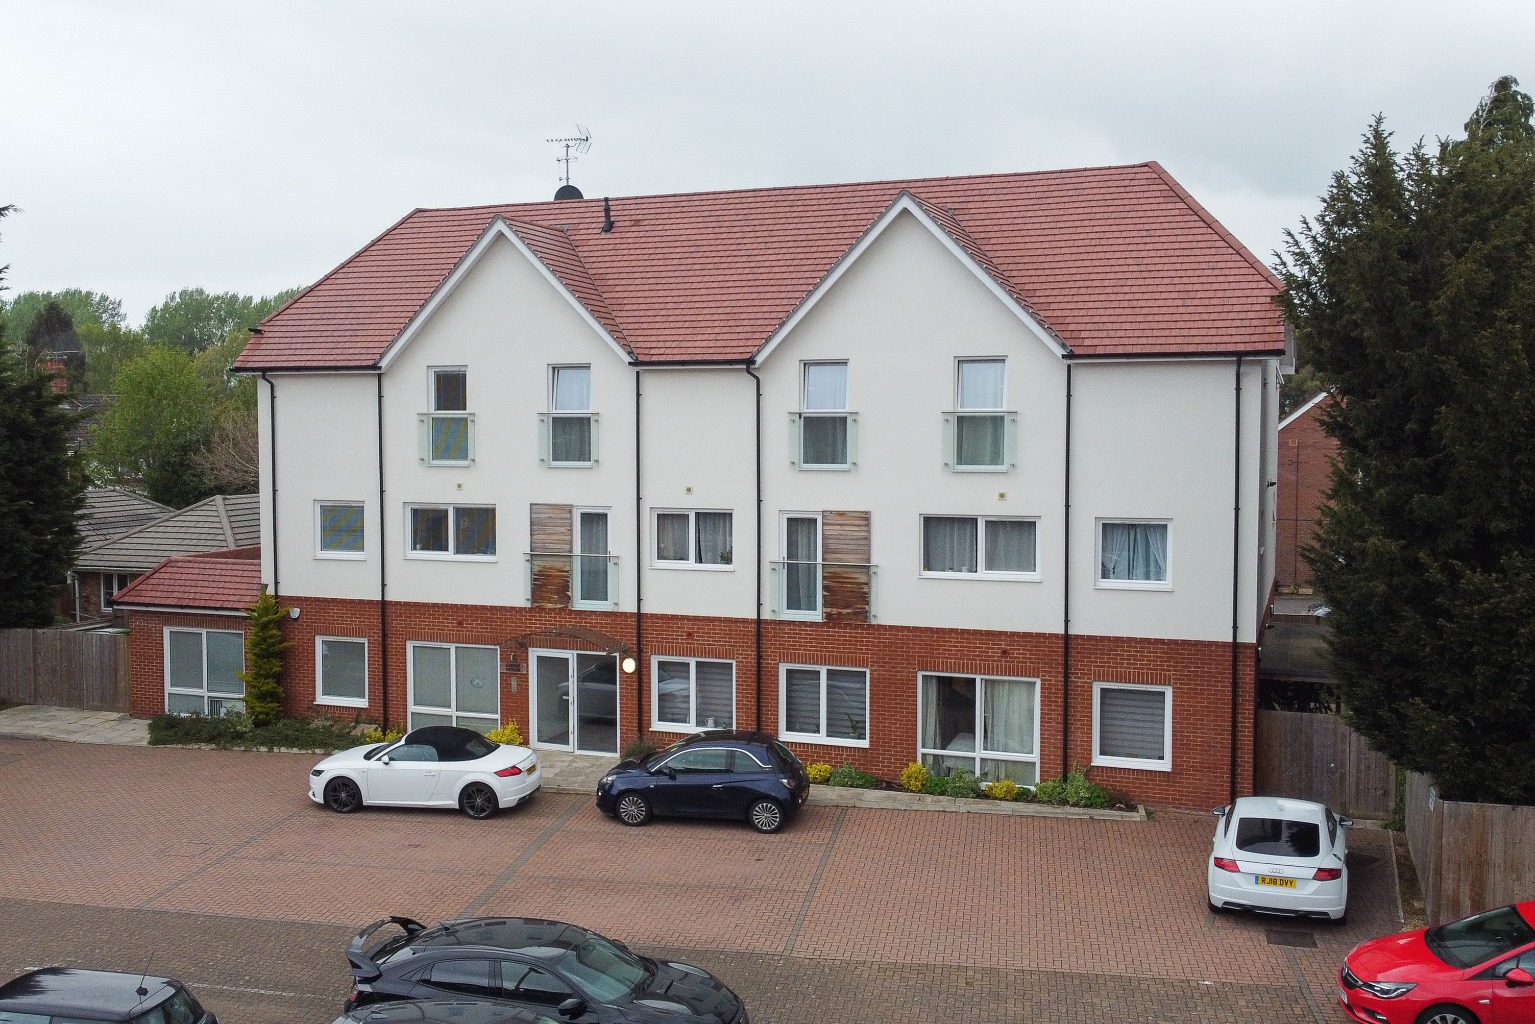 *MARKETED BY CHRIS GRAY*  This luxury top floor apartment is situated just a very short walk of the town centre, and just a few minutes walk of Farnborough mainline station.